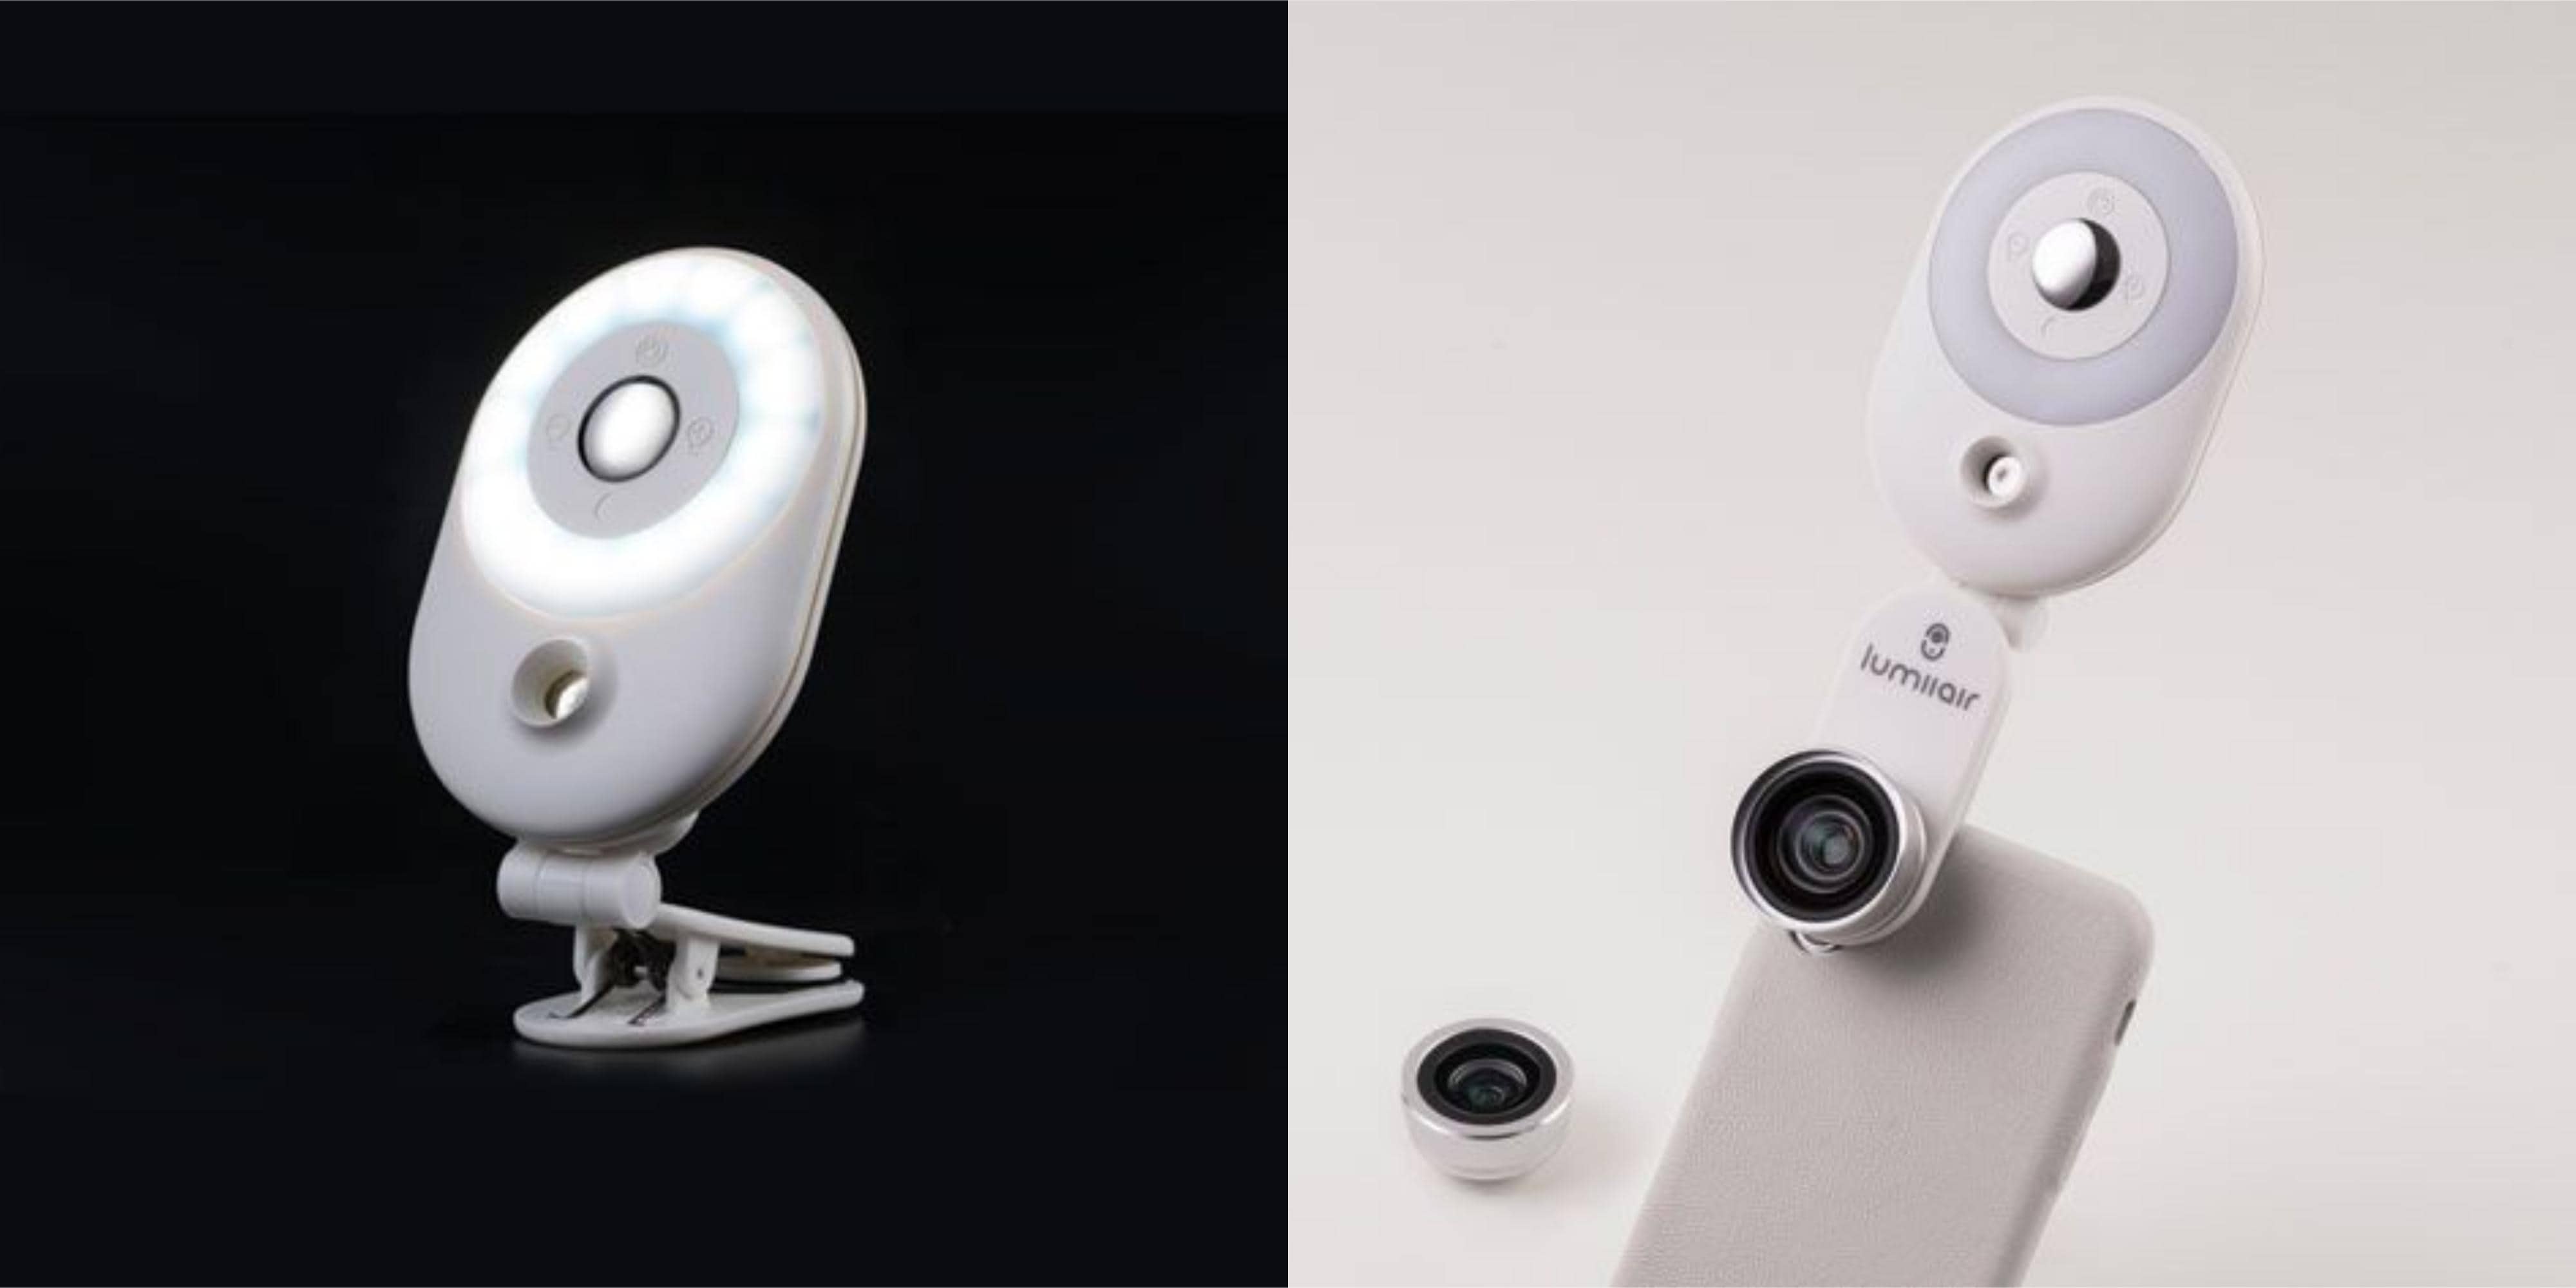 This beauty-oriented iPhone accessory adds a fisheye camera with LED light ring, humidifier for skincare, and more.